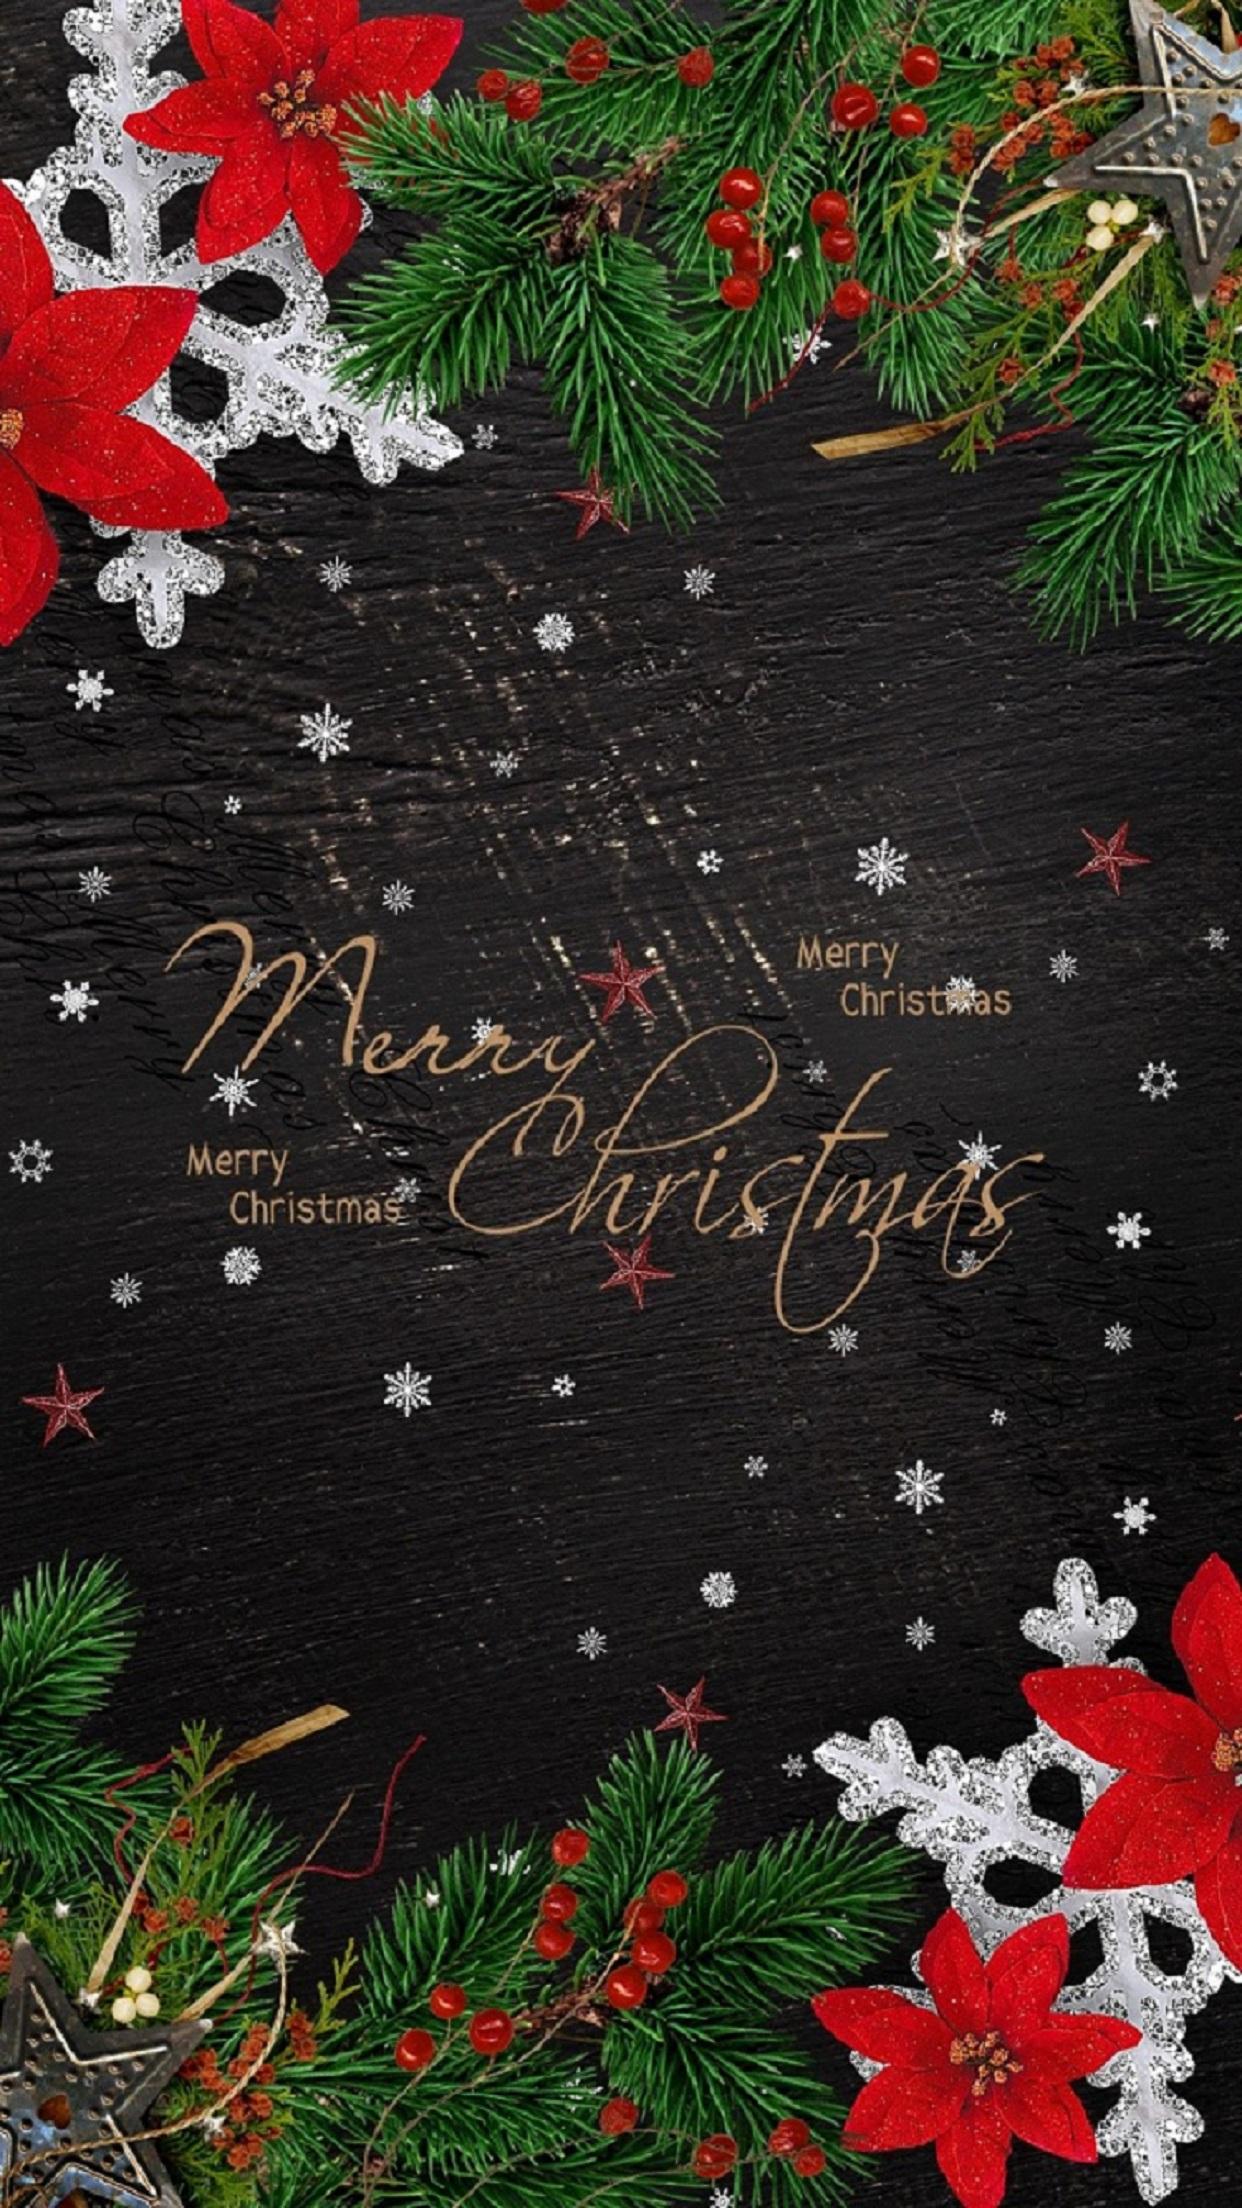 Free Merry Christmas Wallpaper HD Image for iPhone & Desktop